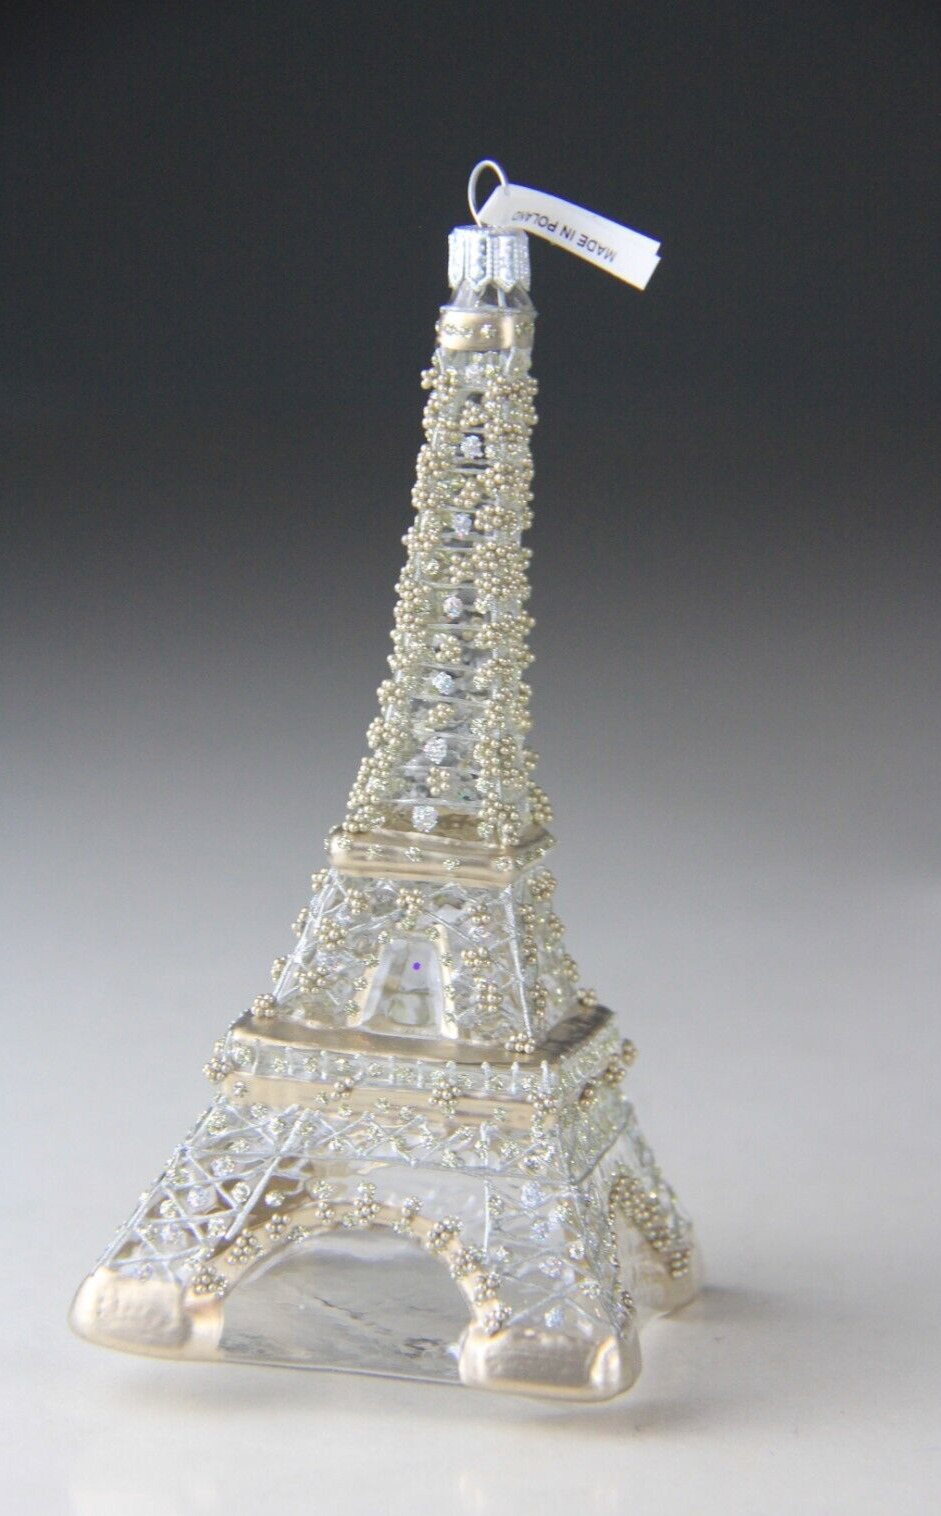 Nordstrom @Home Glass Eiffel Tower Ornament w/ Original Box Made in Poland-6.5”